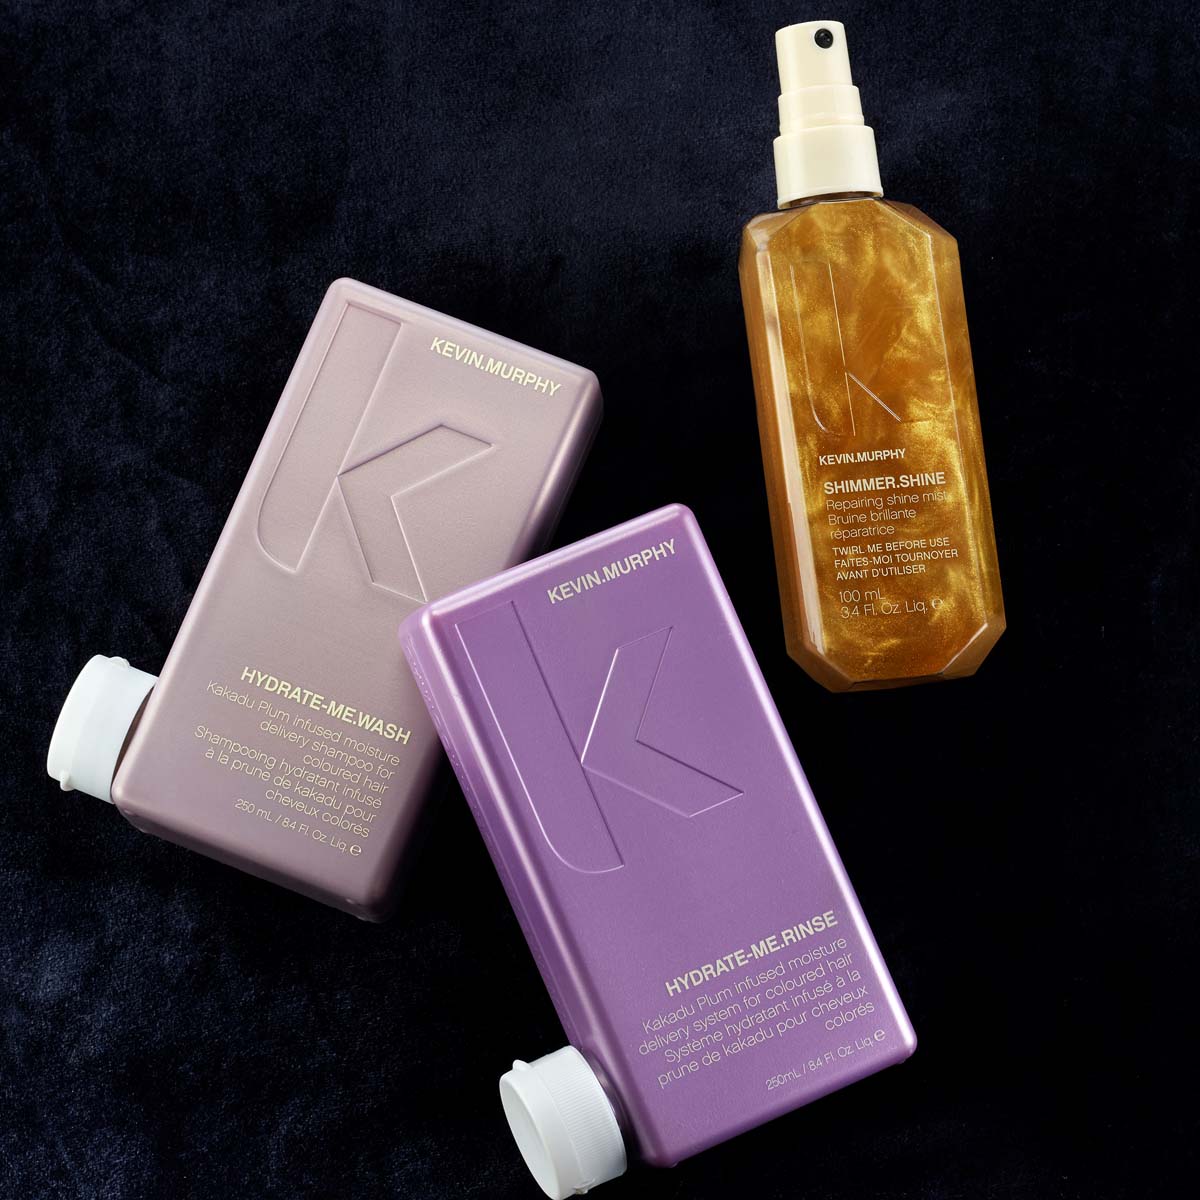 Kevin Murphy Holiday Box, Glow Up - Hydrate - Hairsale.se